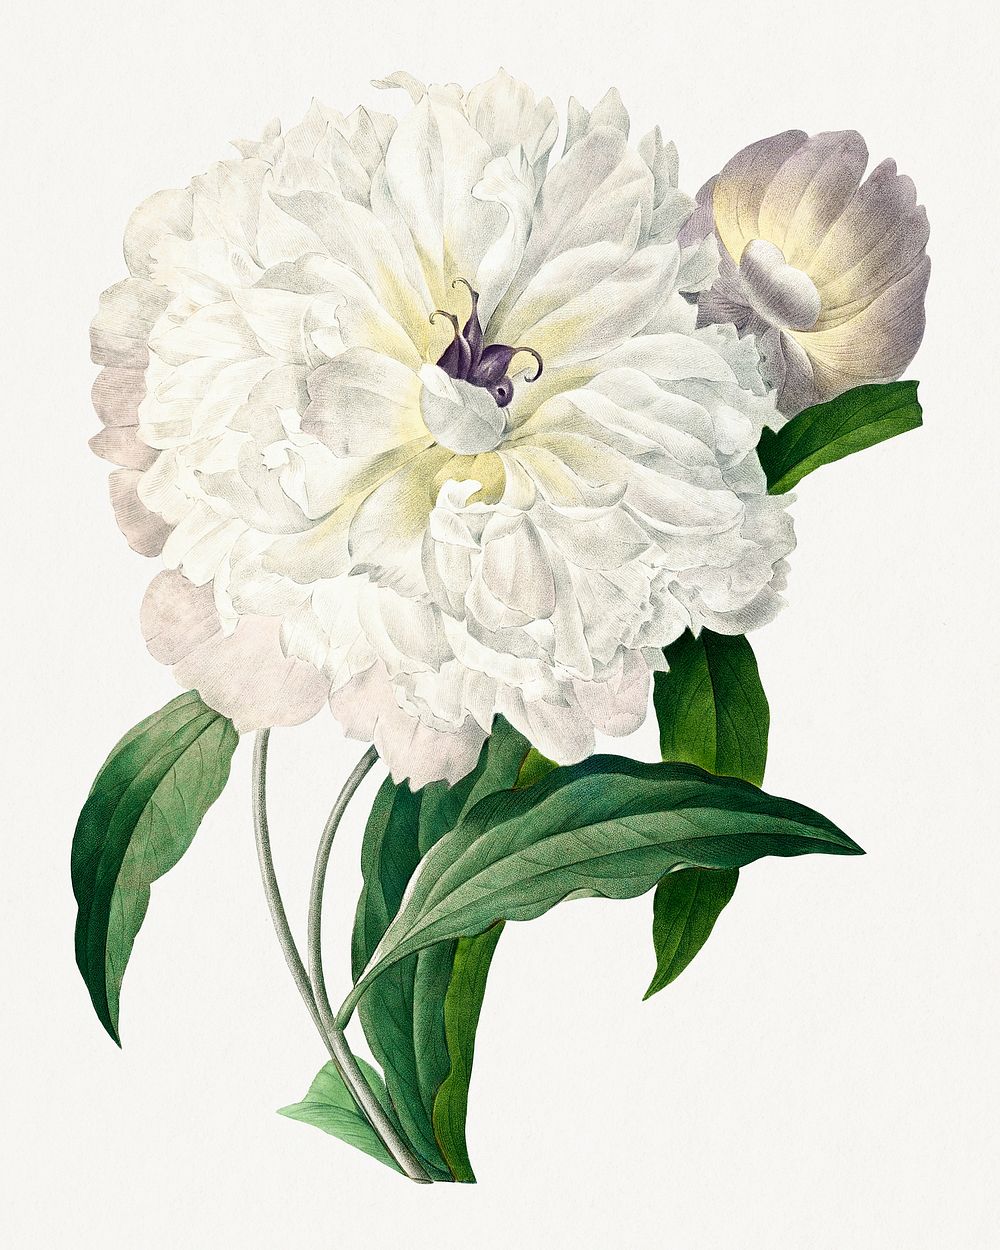 Peony from Choix des plus belles fleurs (1827) by Pierre-Joseph Redout&eacute;. Original from Biodiversity Heritage Library.…